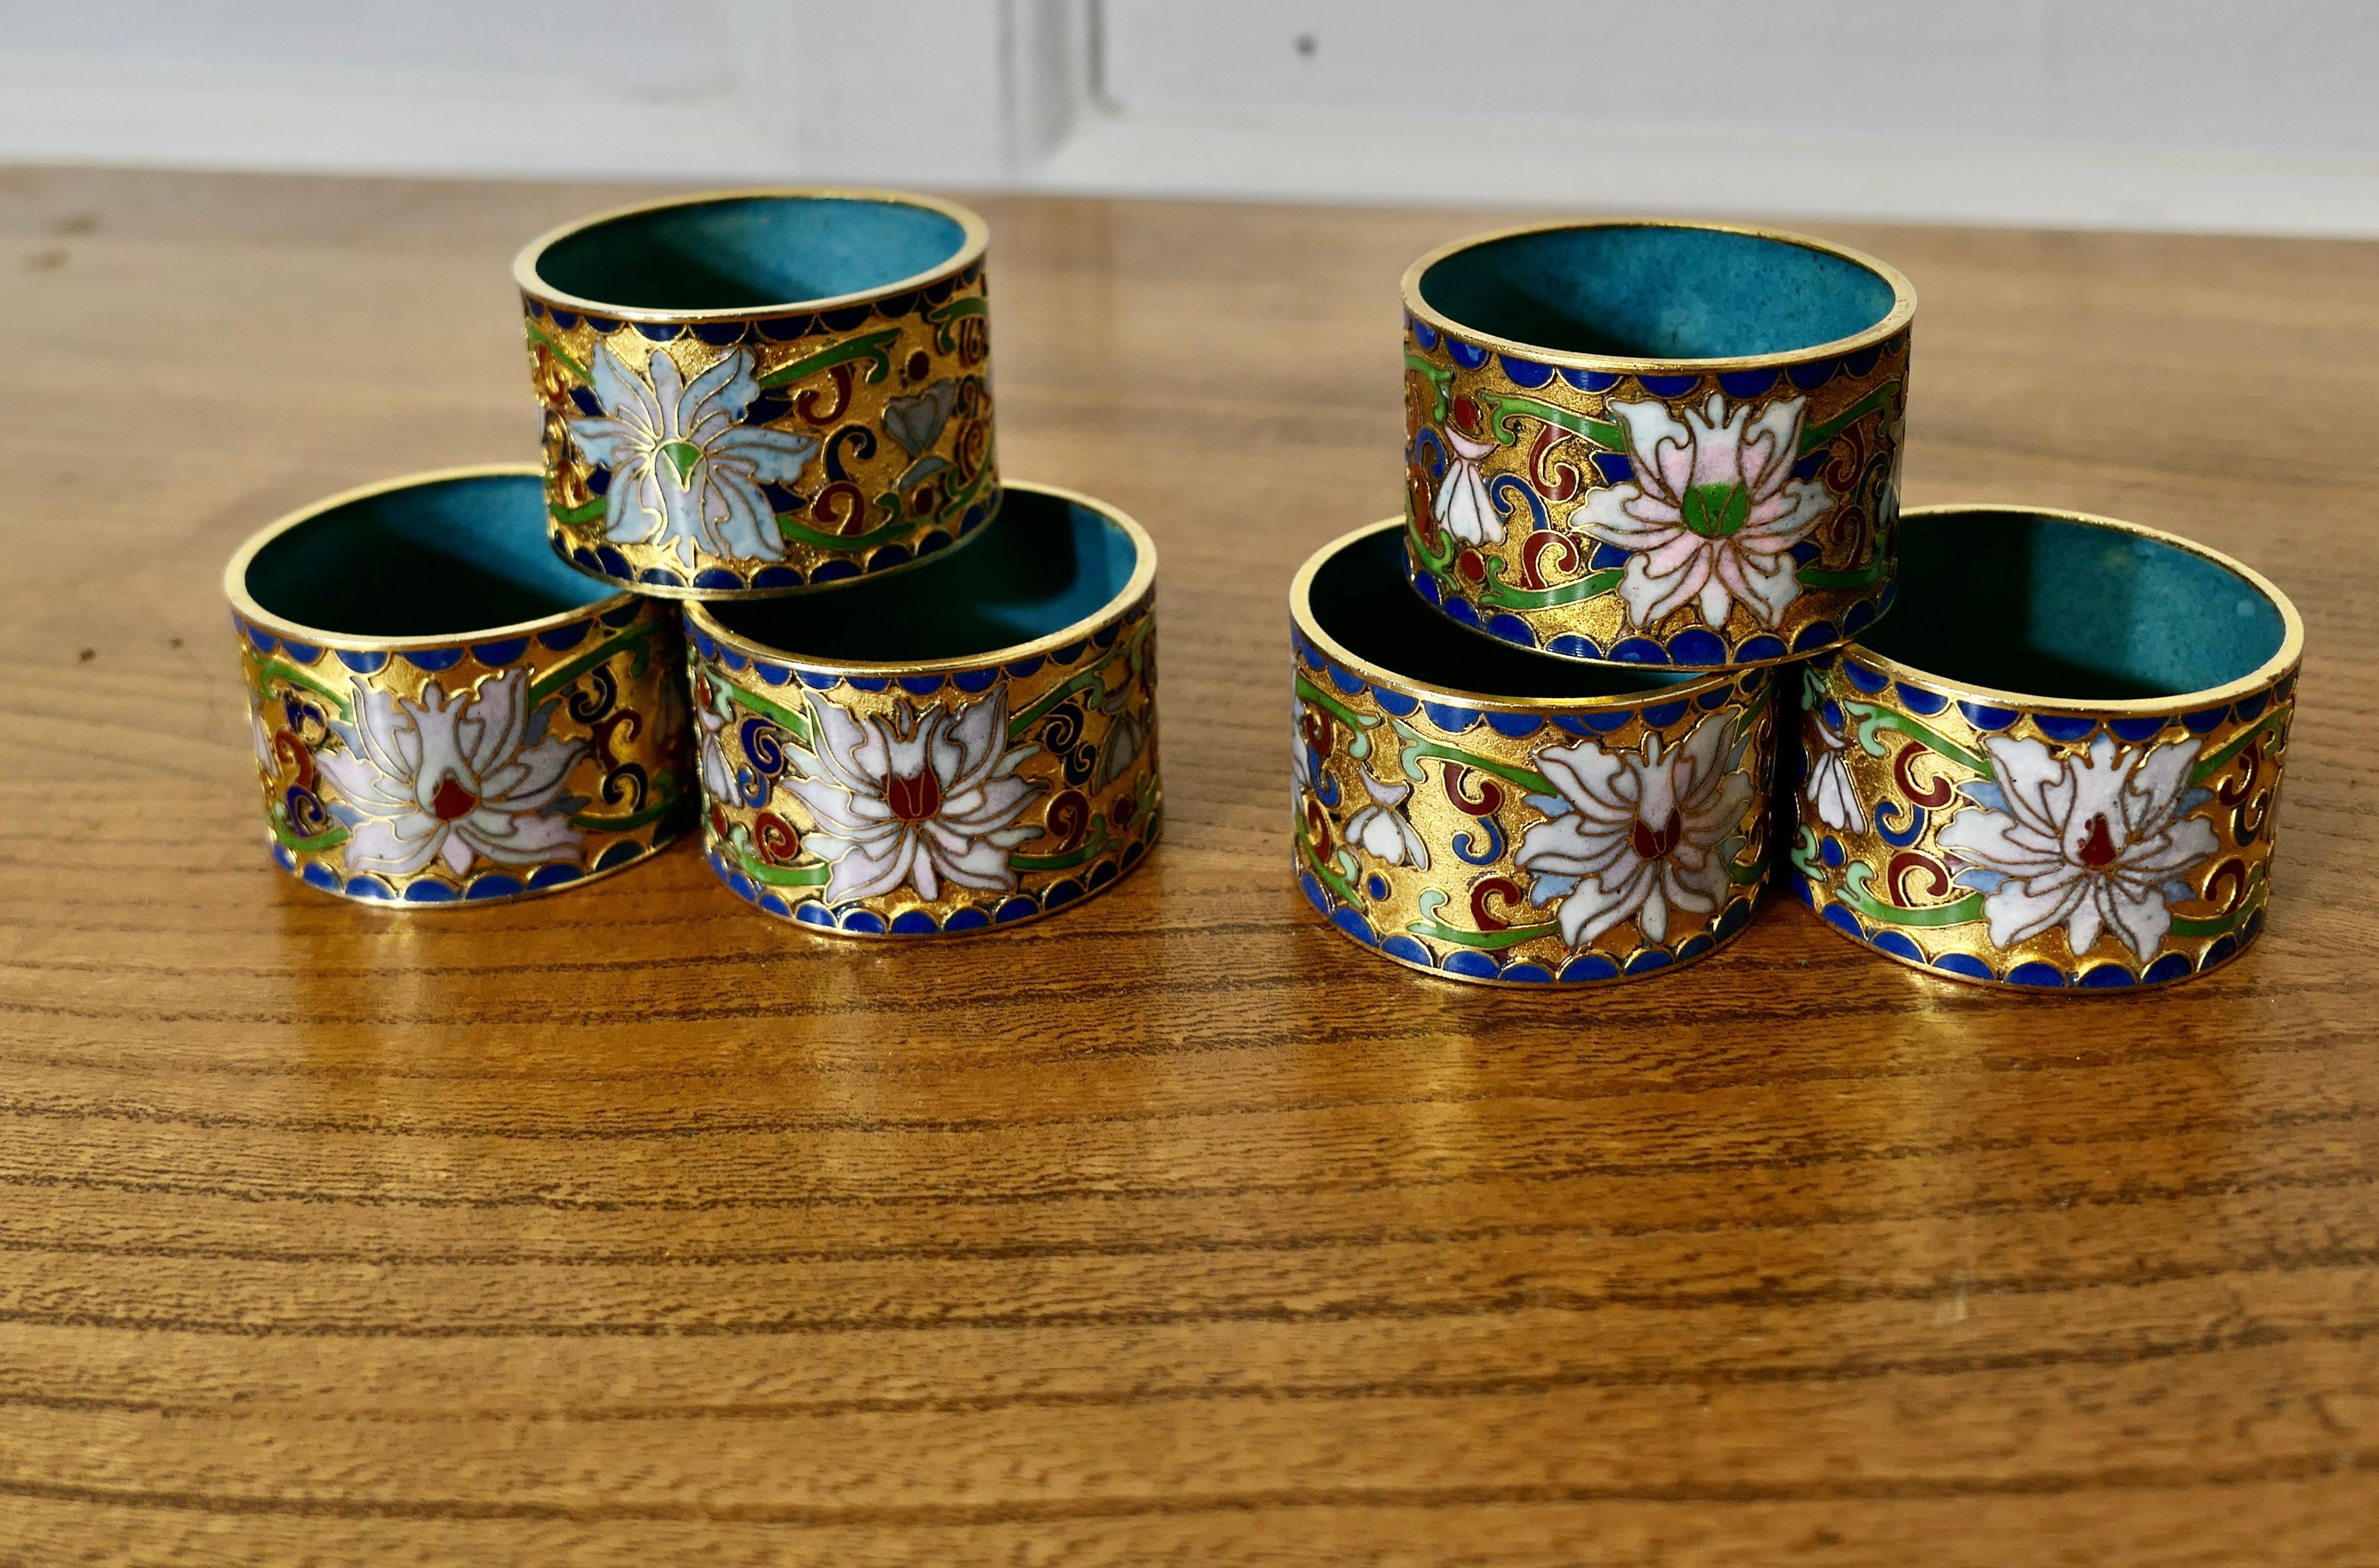 Brass and Enamel Indian Serviette Rings

A lovely set of Napkin Rings, made in brass with relief enamelling in bright colourful flower patterns, each ring is slightly different so you can all recognise your own one
A lovely set, the rings are 1”